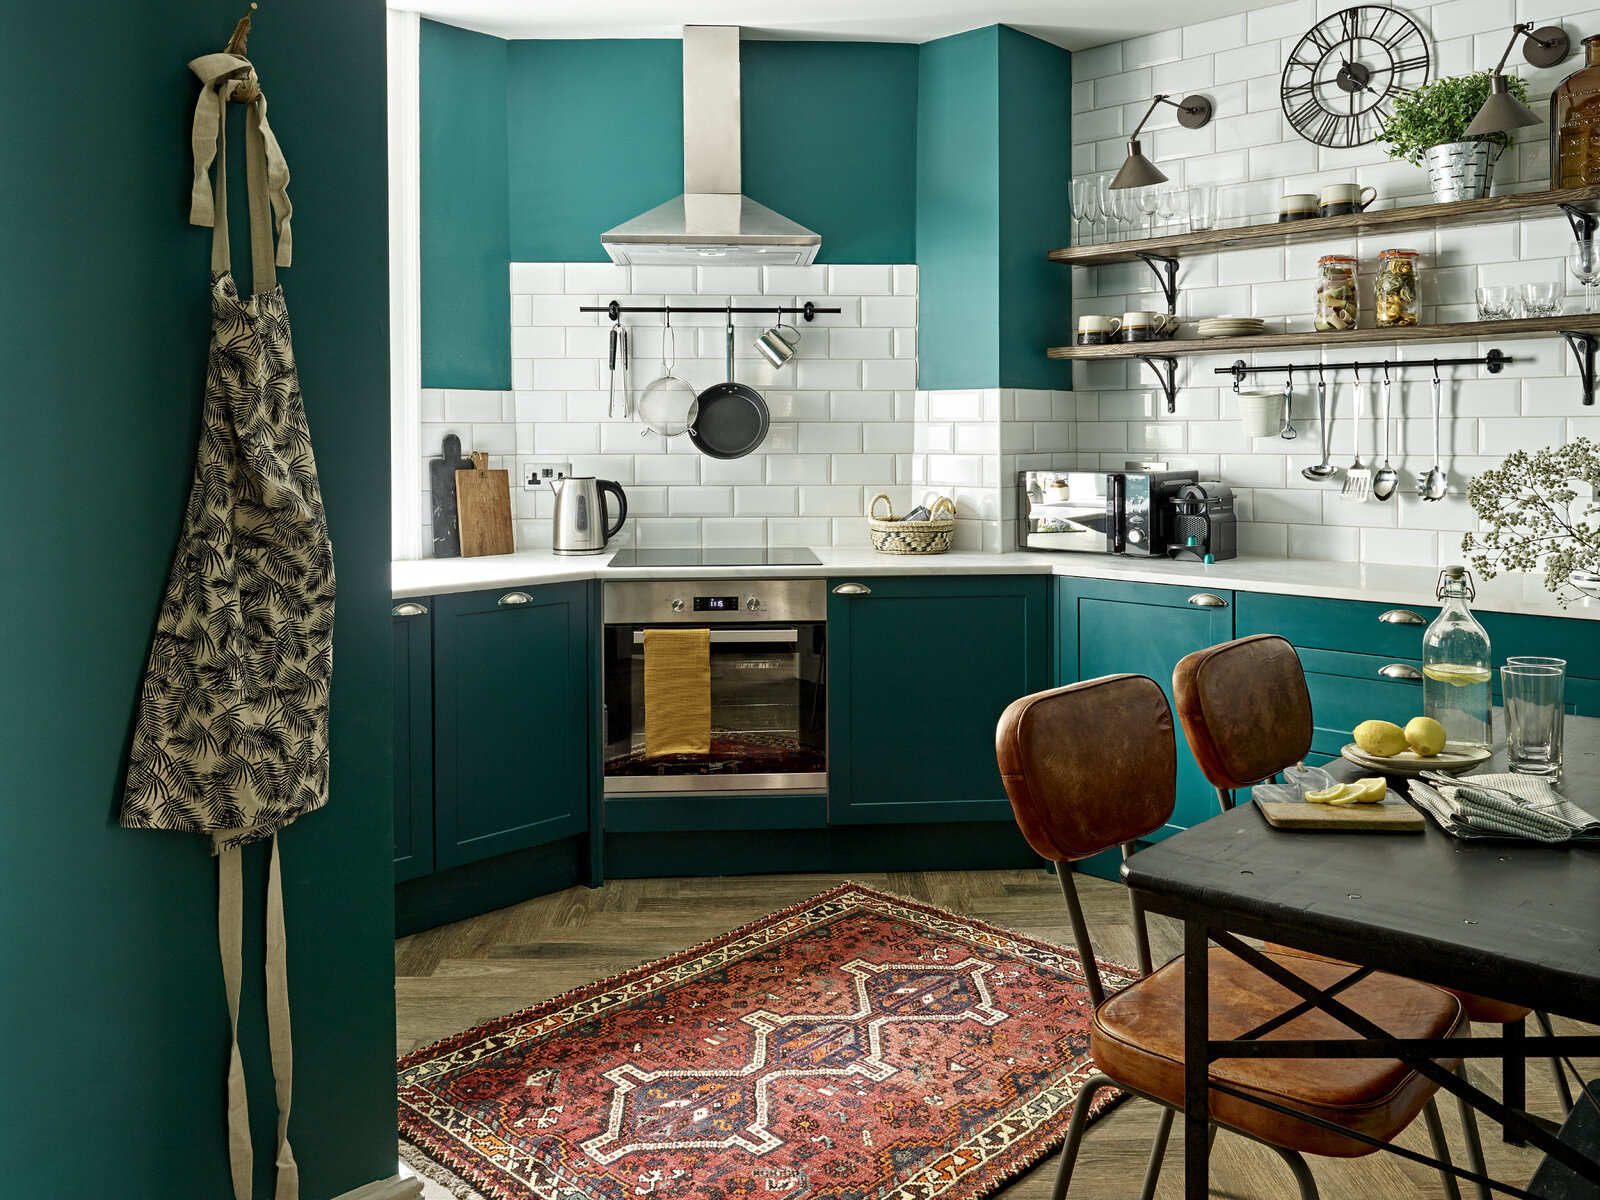 Teal and peacock kitchen wall and cabinet color in modern apartment